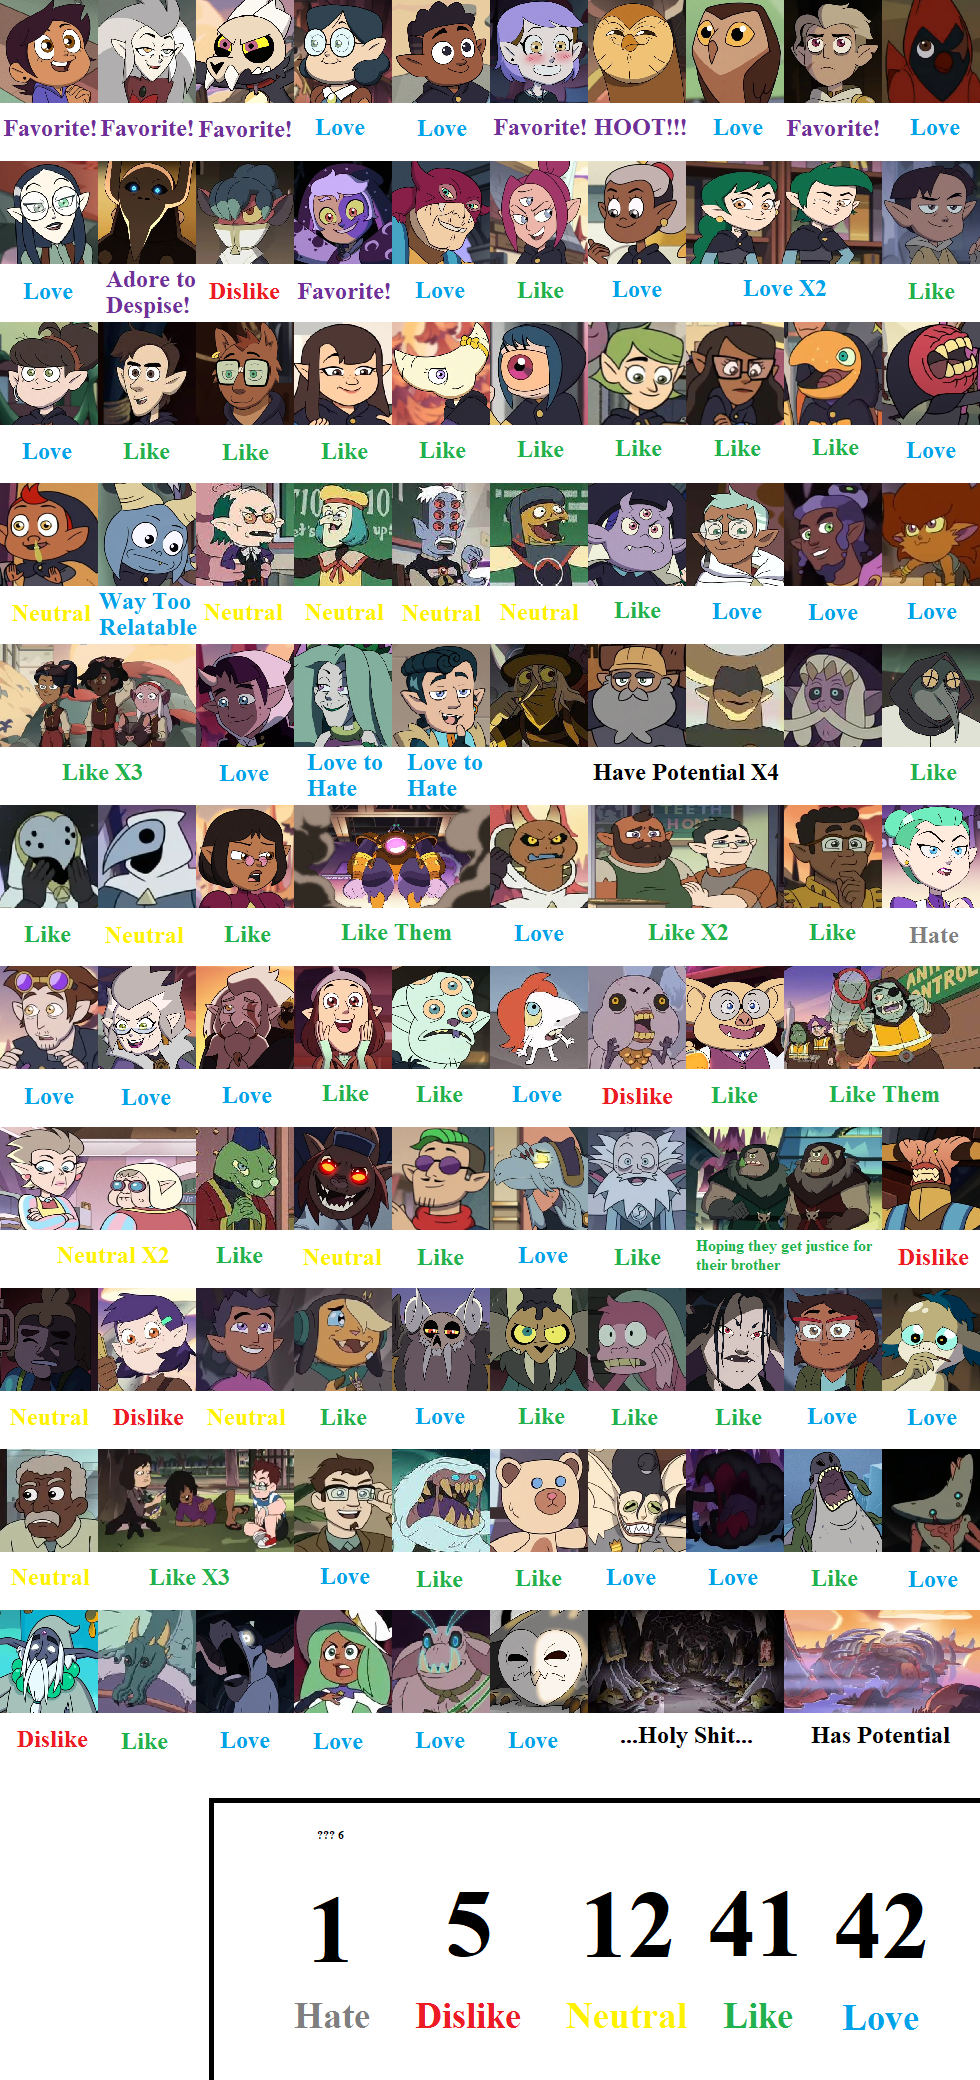 The Owl House Characters Ranked by SecretSong1101 on DeviantArt